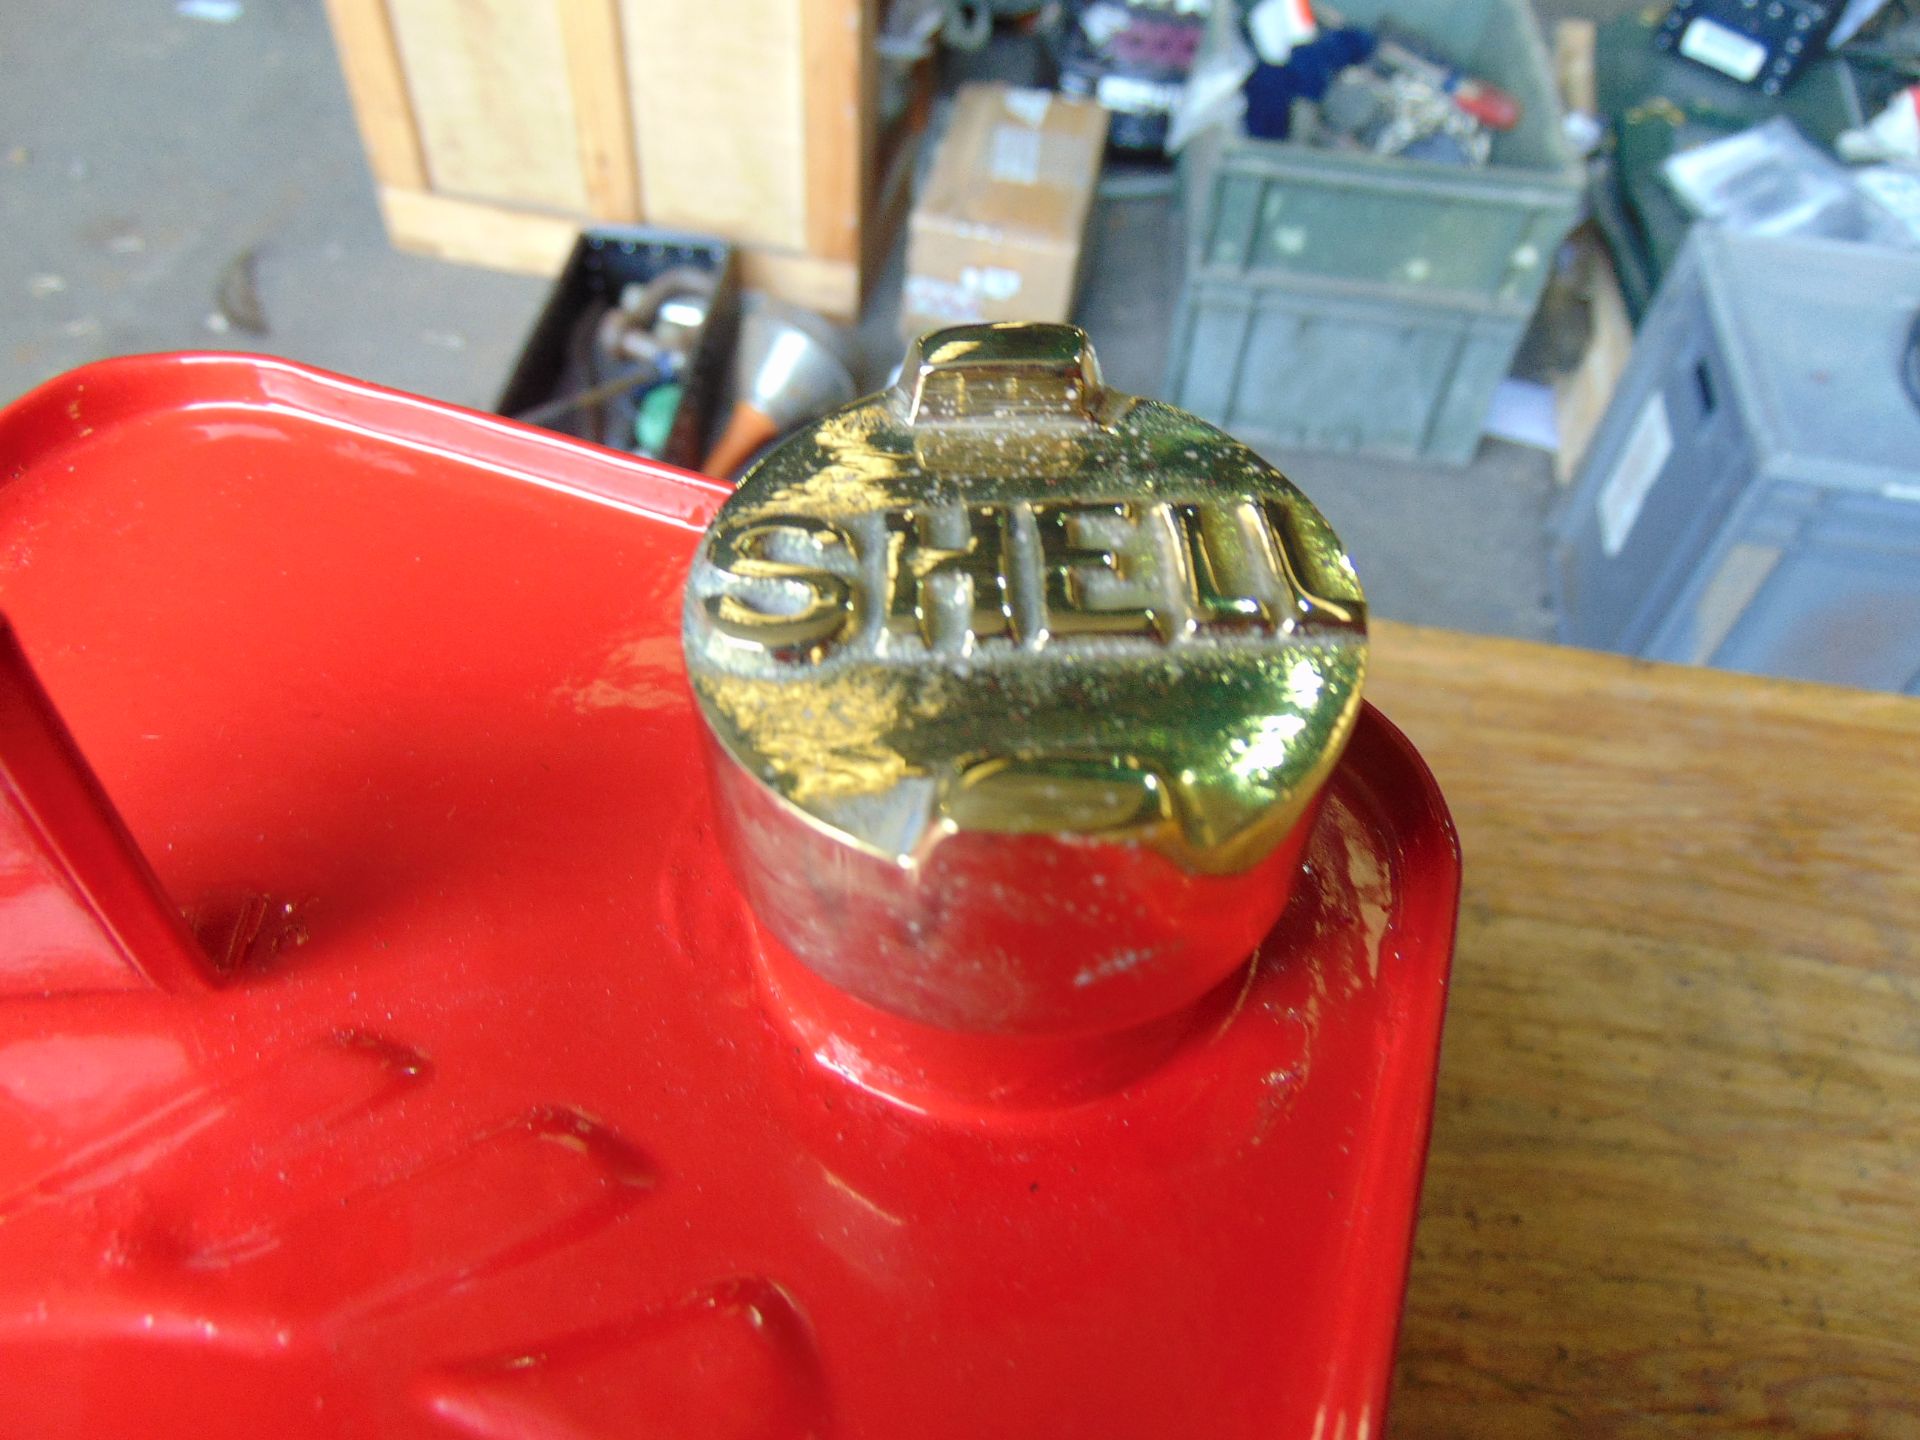 New Unused Shell Motor Spirit 1 Gall Fuel/Oil Can with Brass Cap - Image 3 of 7